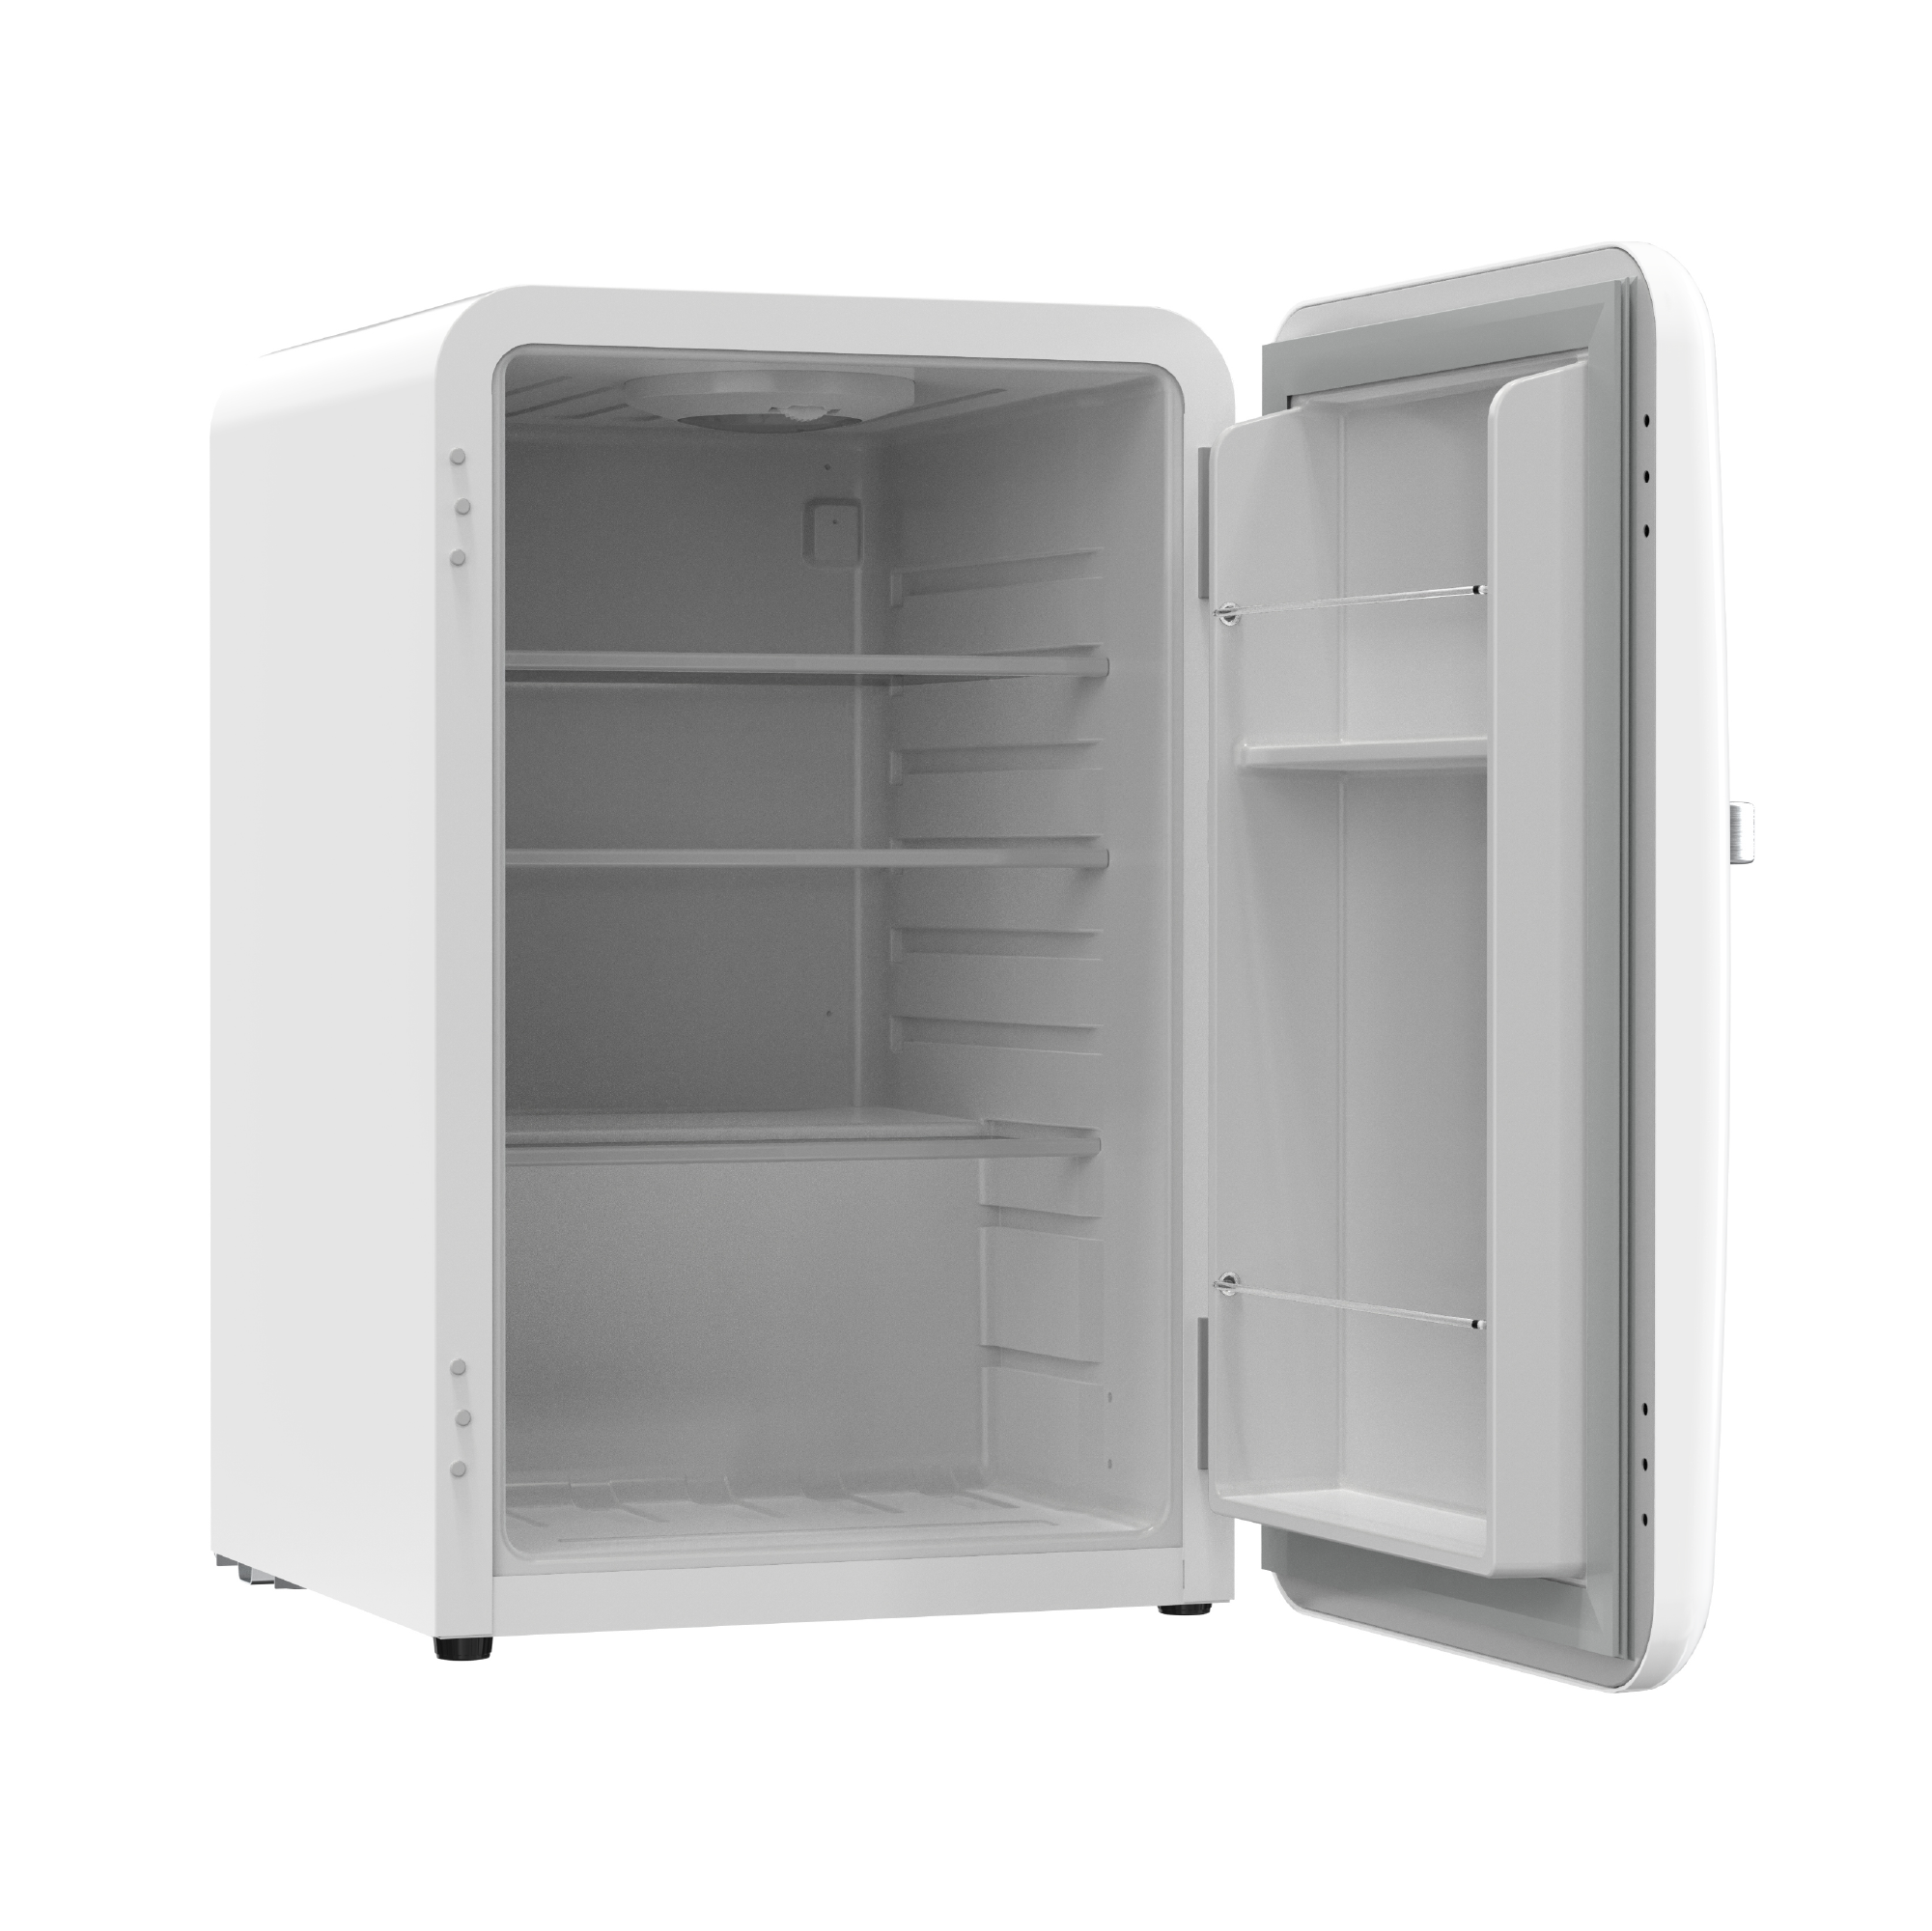 Side view of a 2.5 Cu Ft White Iconic Beverage Retro Fridge with the door open, showcasing interior space featuring 3 glass shelves